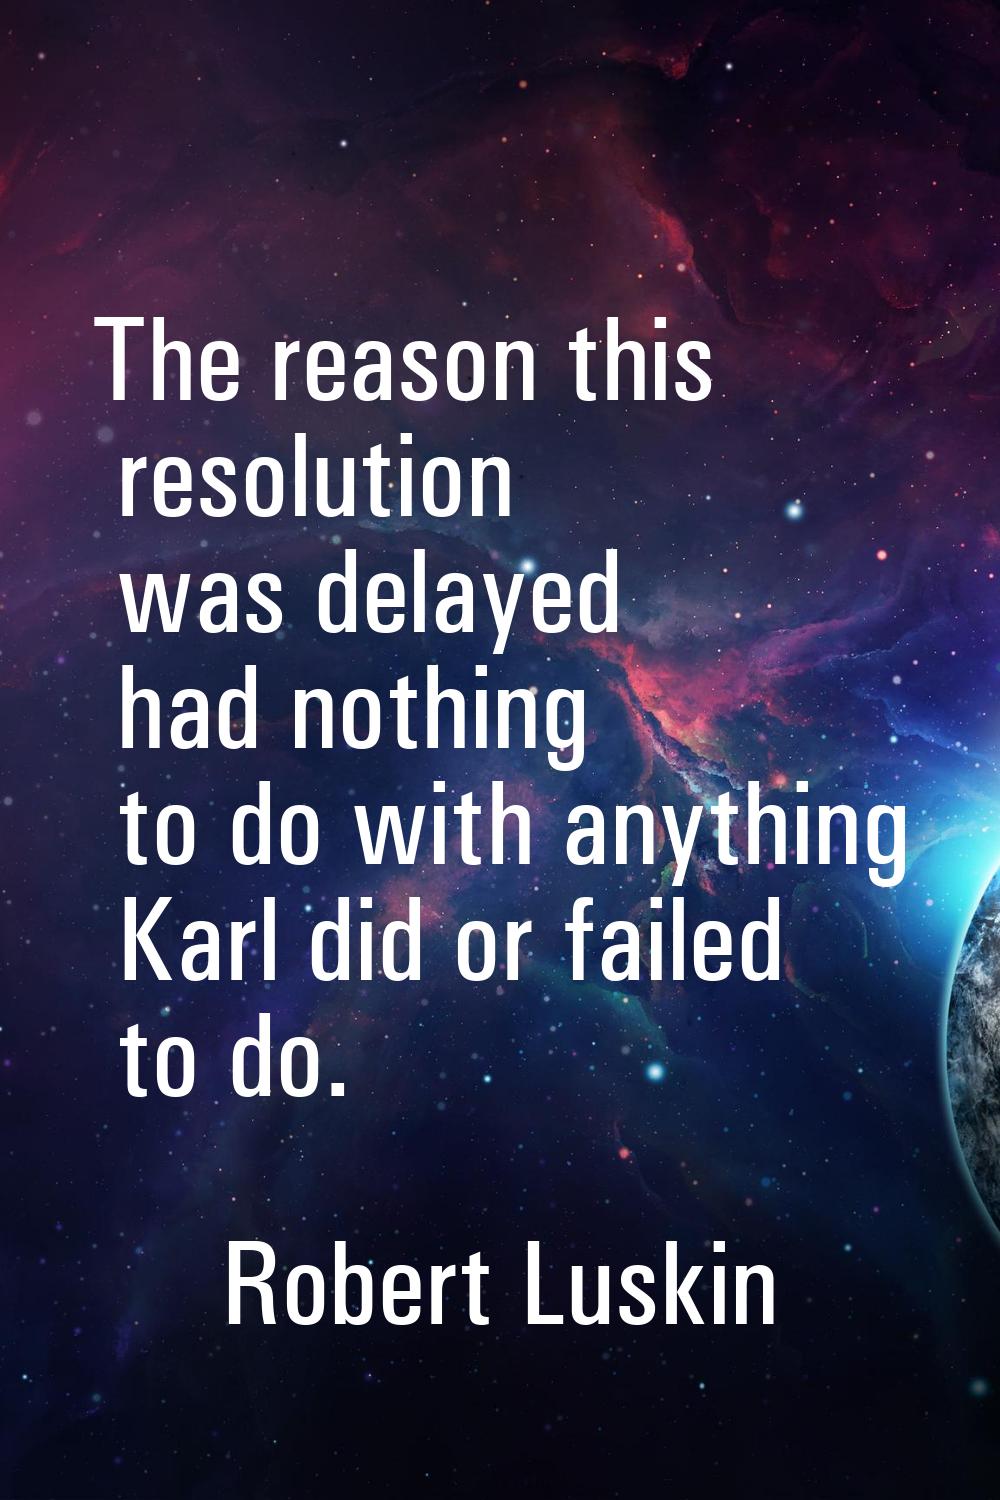 The reason this resolution was delayed had nothing to do with anything Karl did or failed to do.